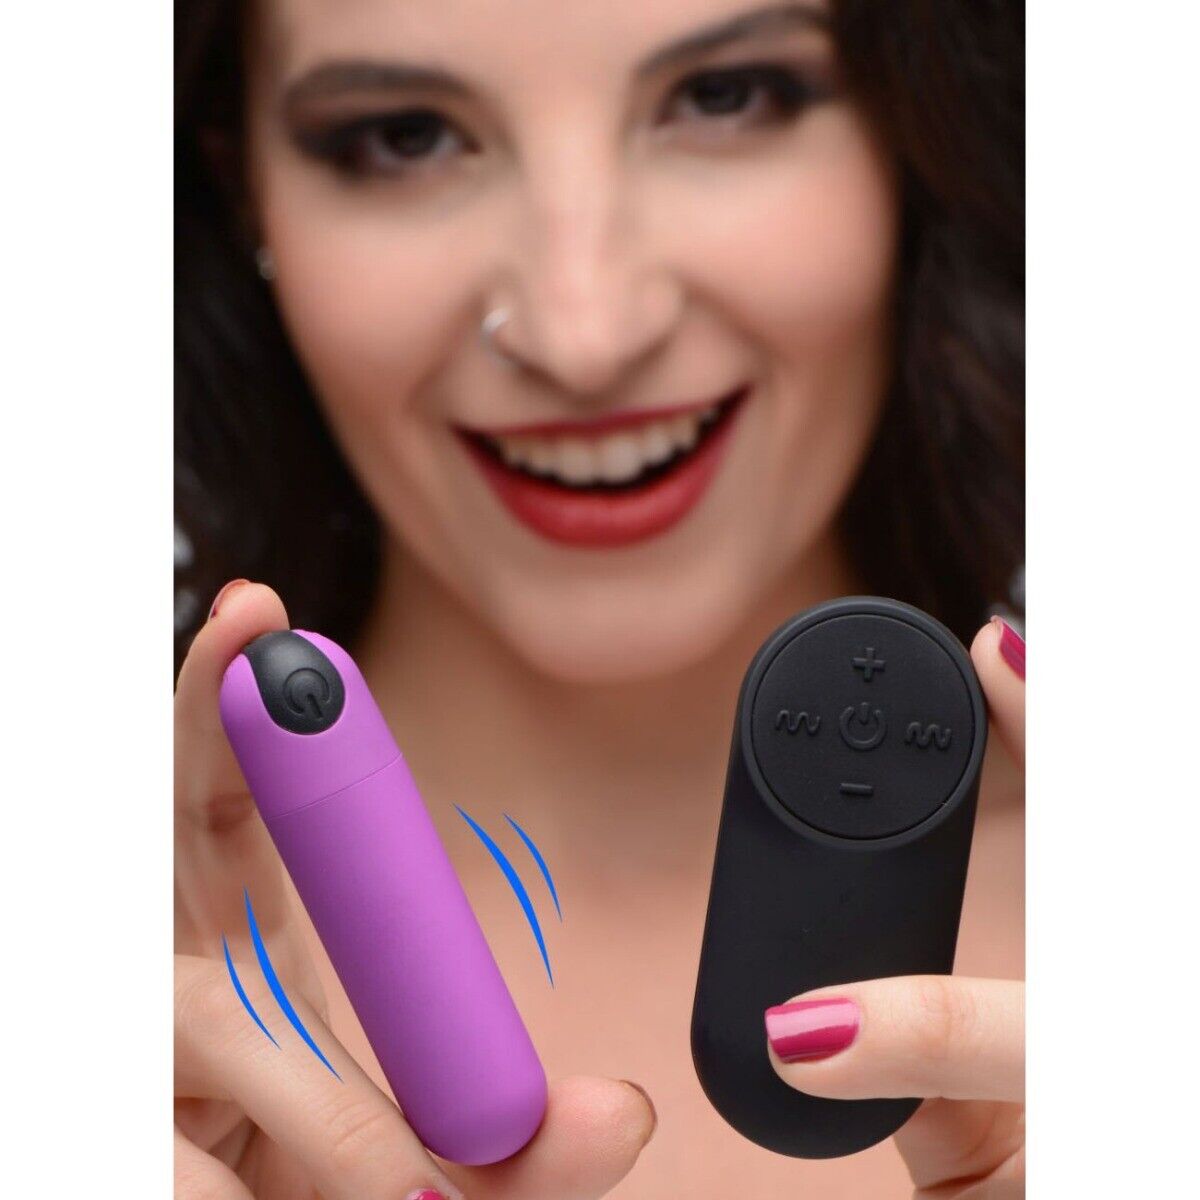 Wireless Remote Control Bullet Clit Nipple Vibrator Sex-toys for Women Couples